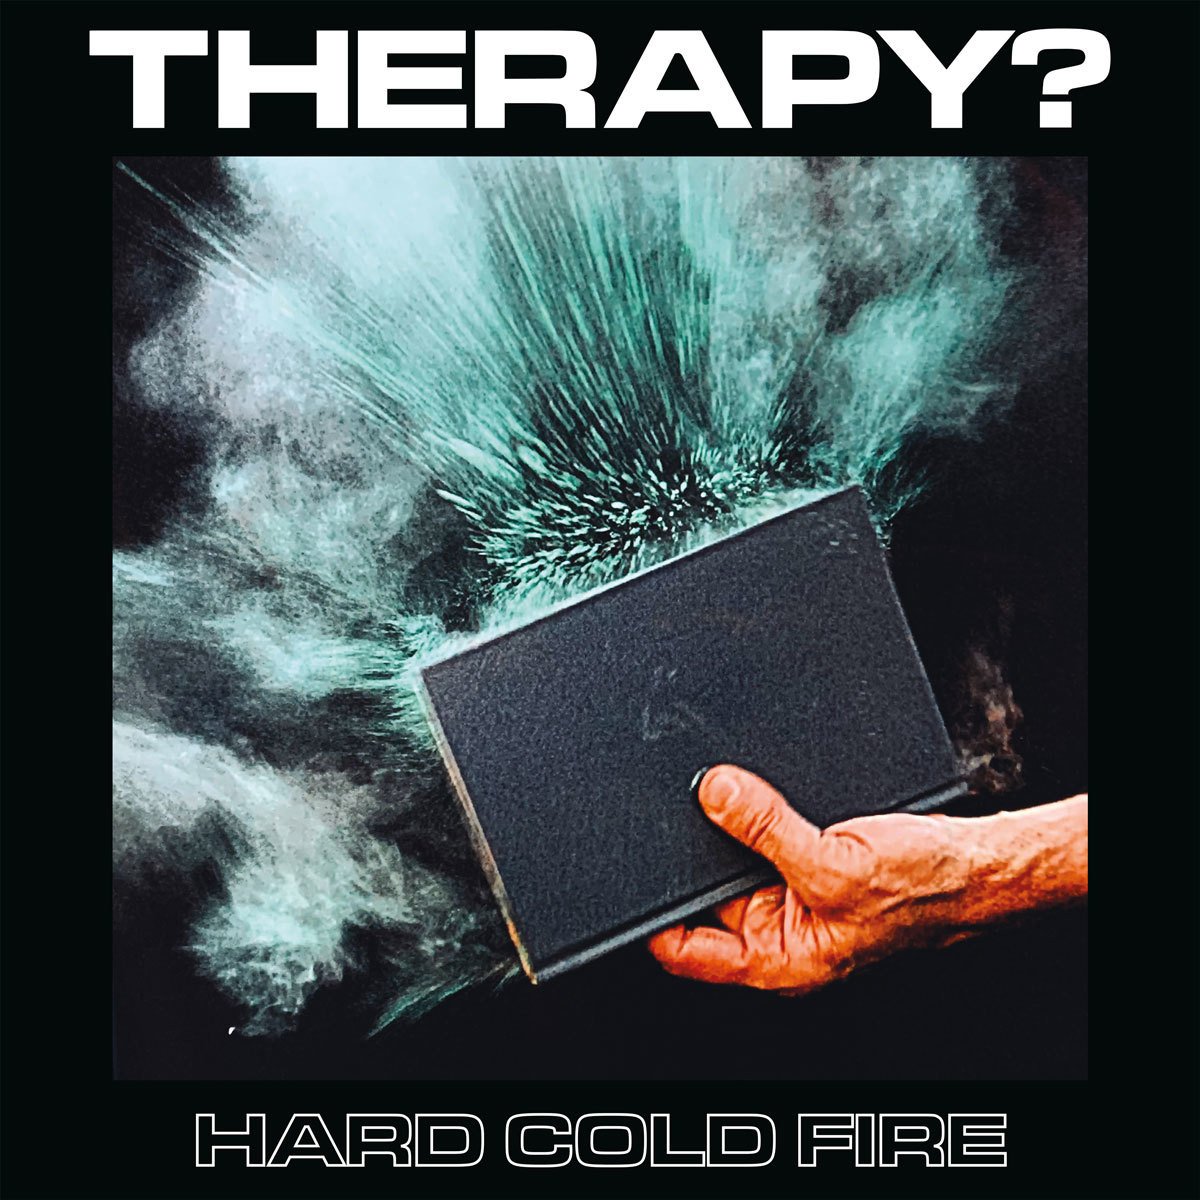 CD Shop - THERAPY? HARD COLD FIRE